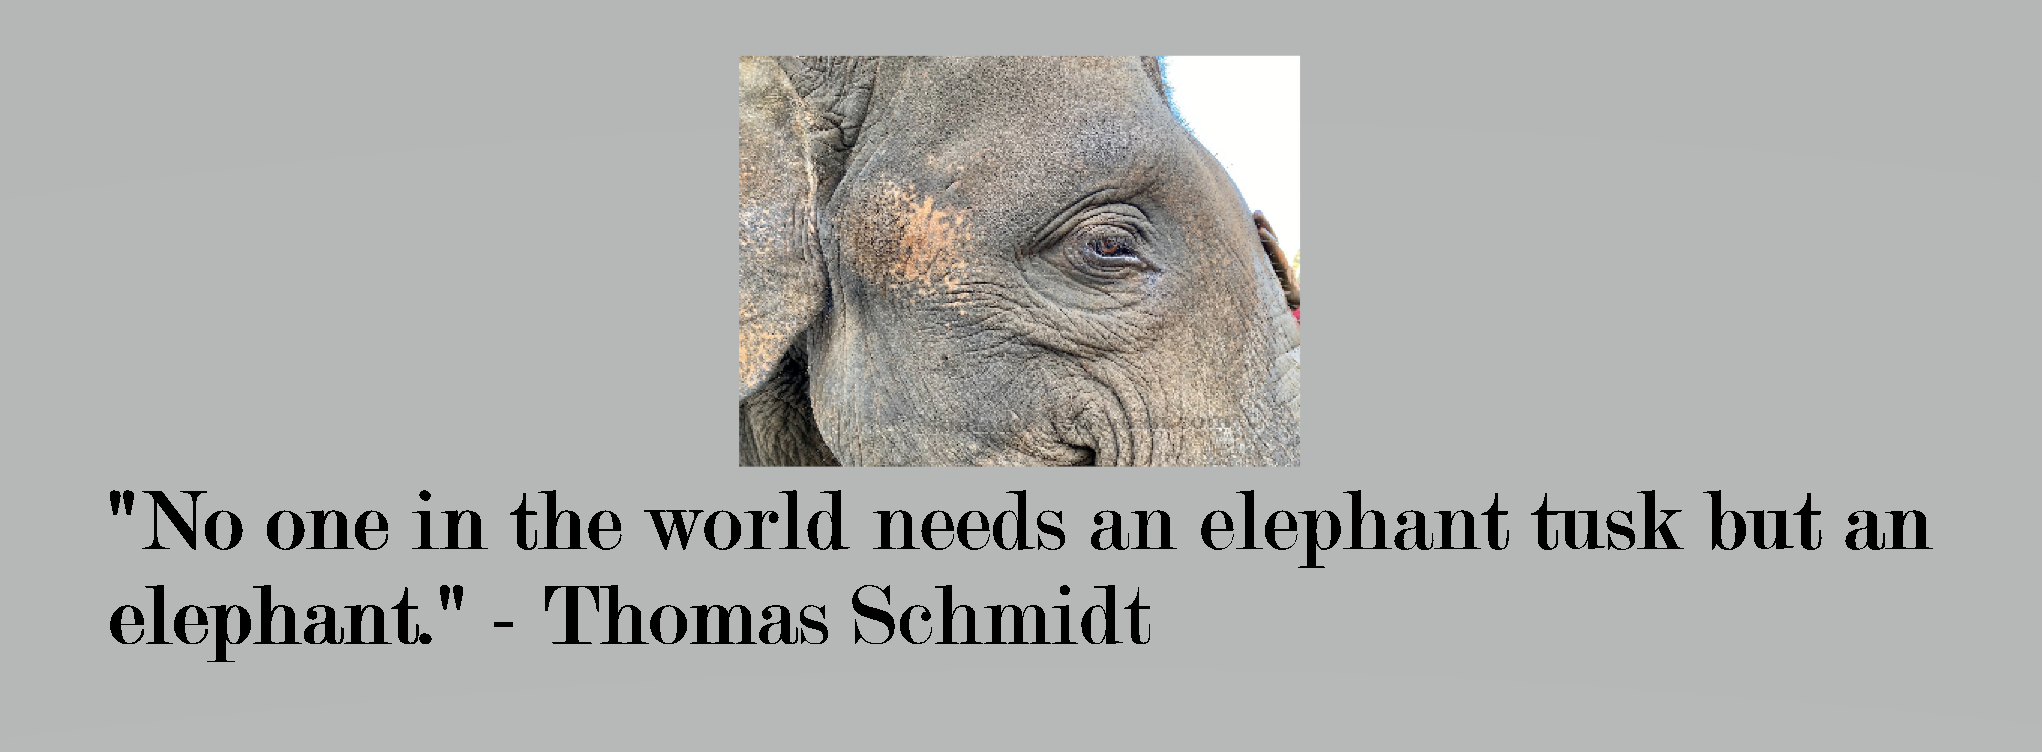 Quote: "No one in the world needs an elephant tusk except the elephant."